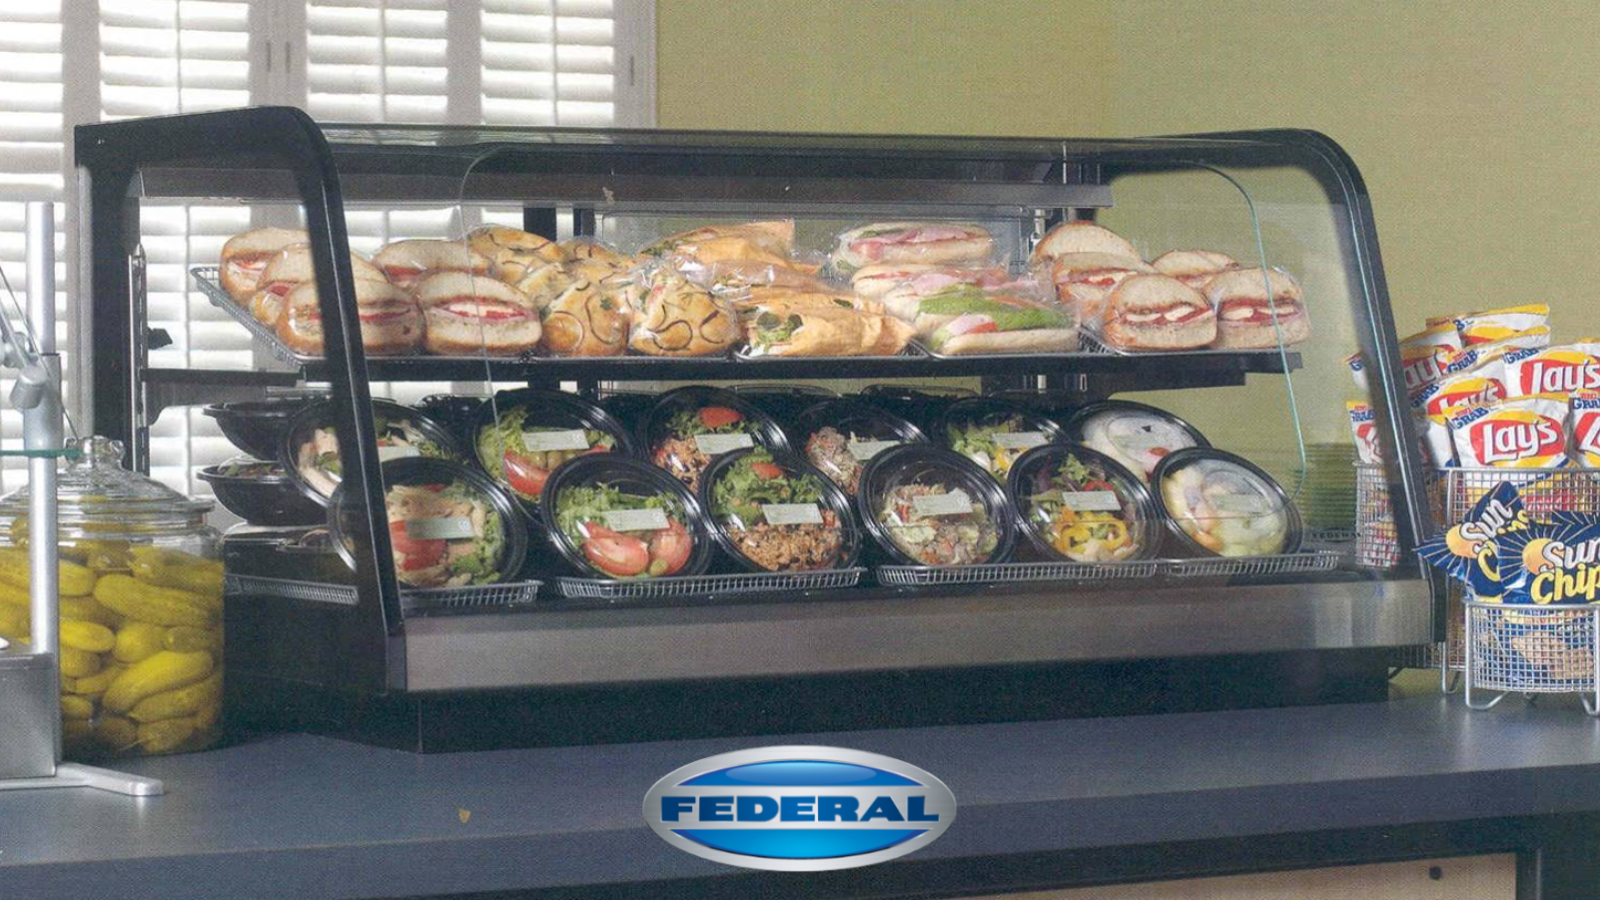 Use Countertop Food Display Cases To Ease Floor Congestion posts